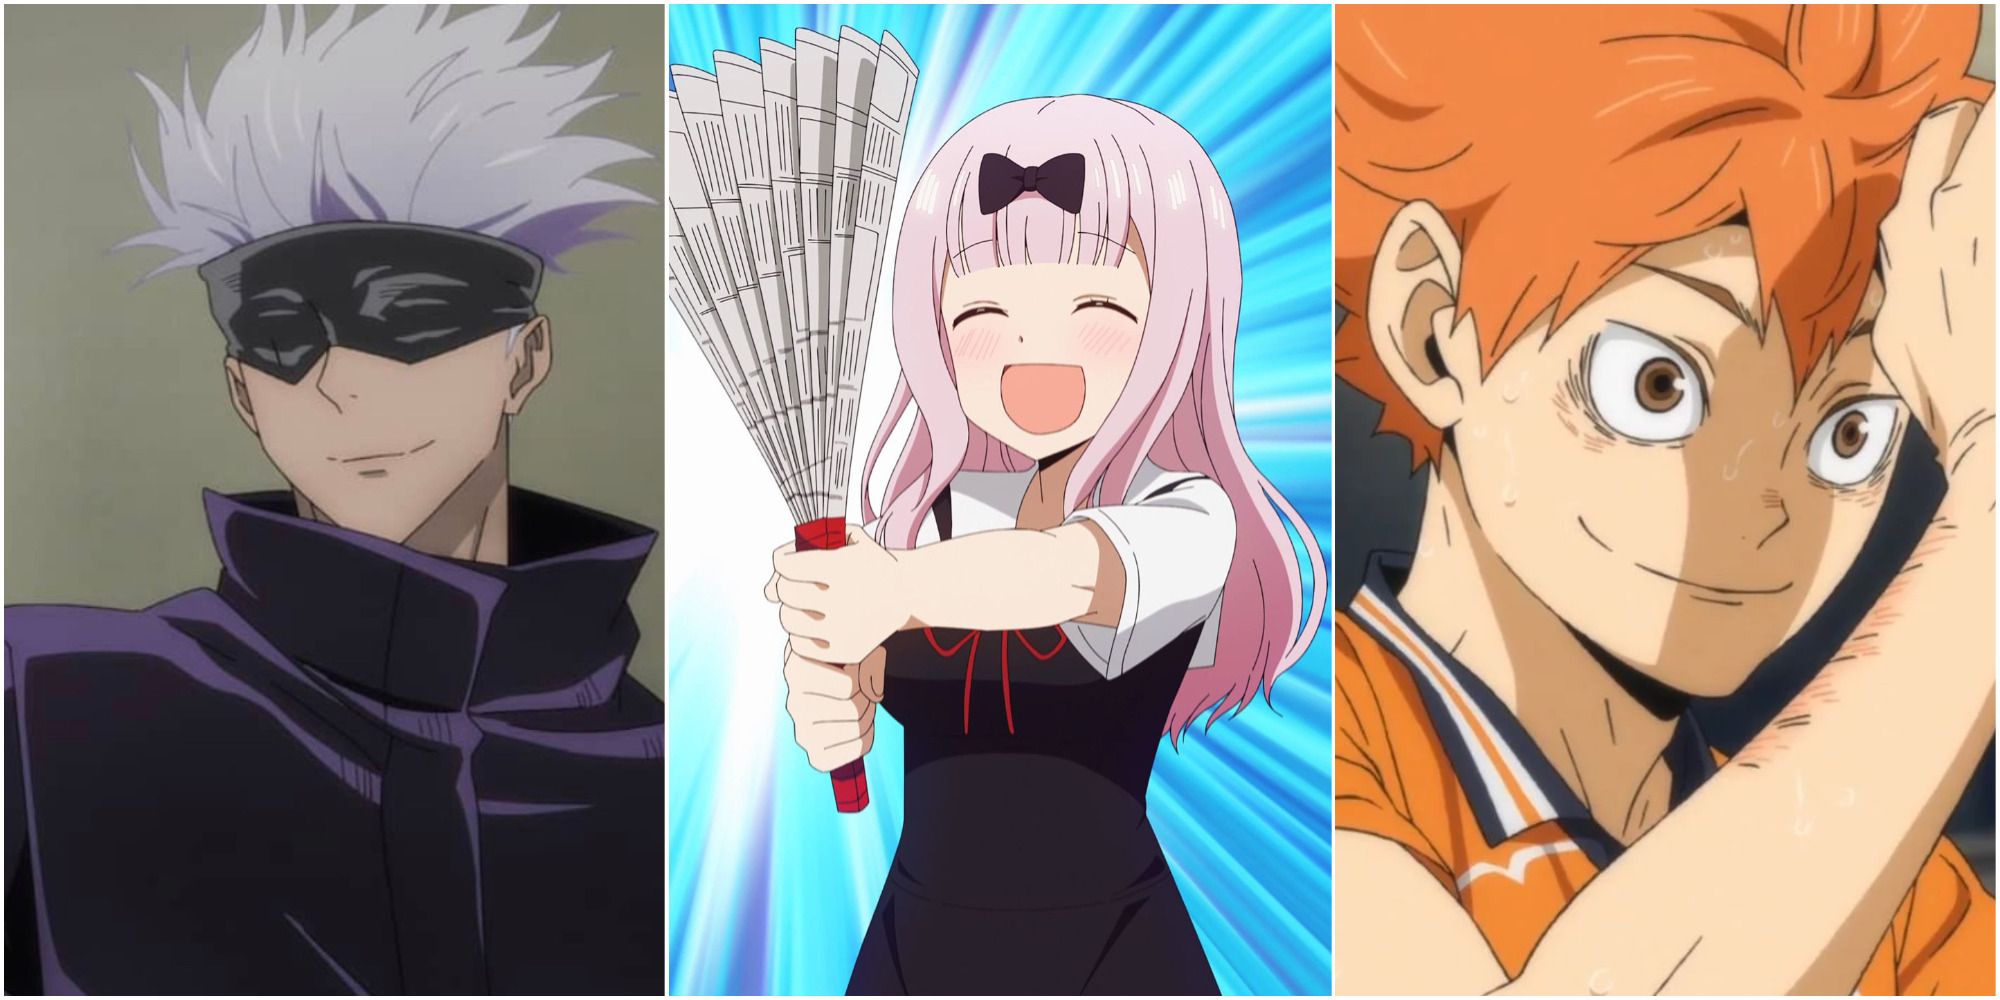 10 Most Popular Anime Characters Of 2020 (According To MyAnimeList)